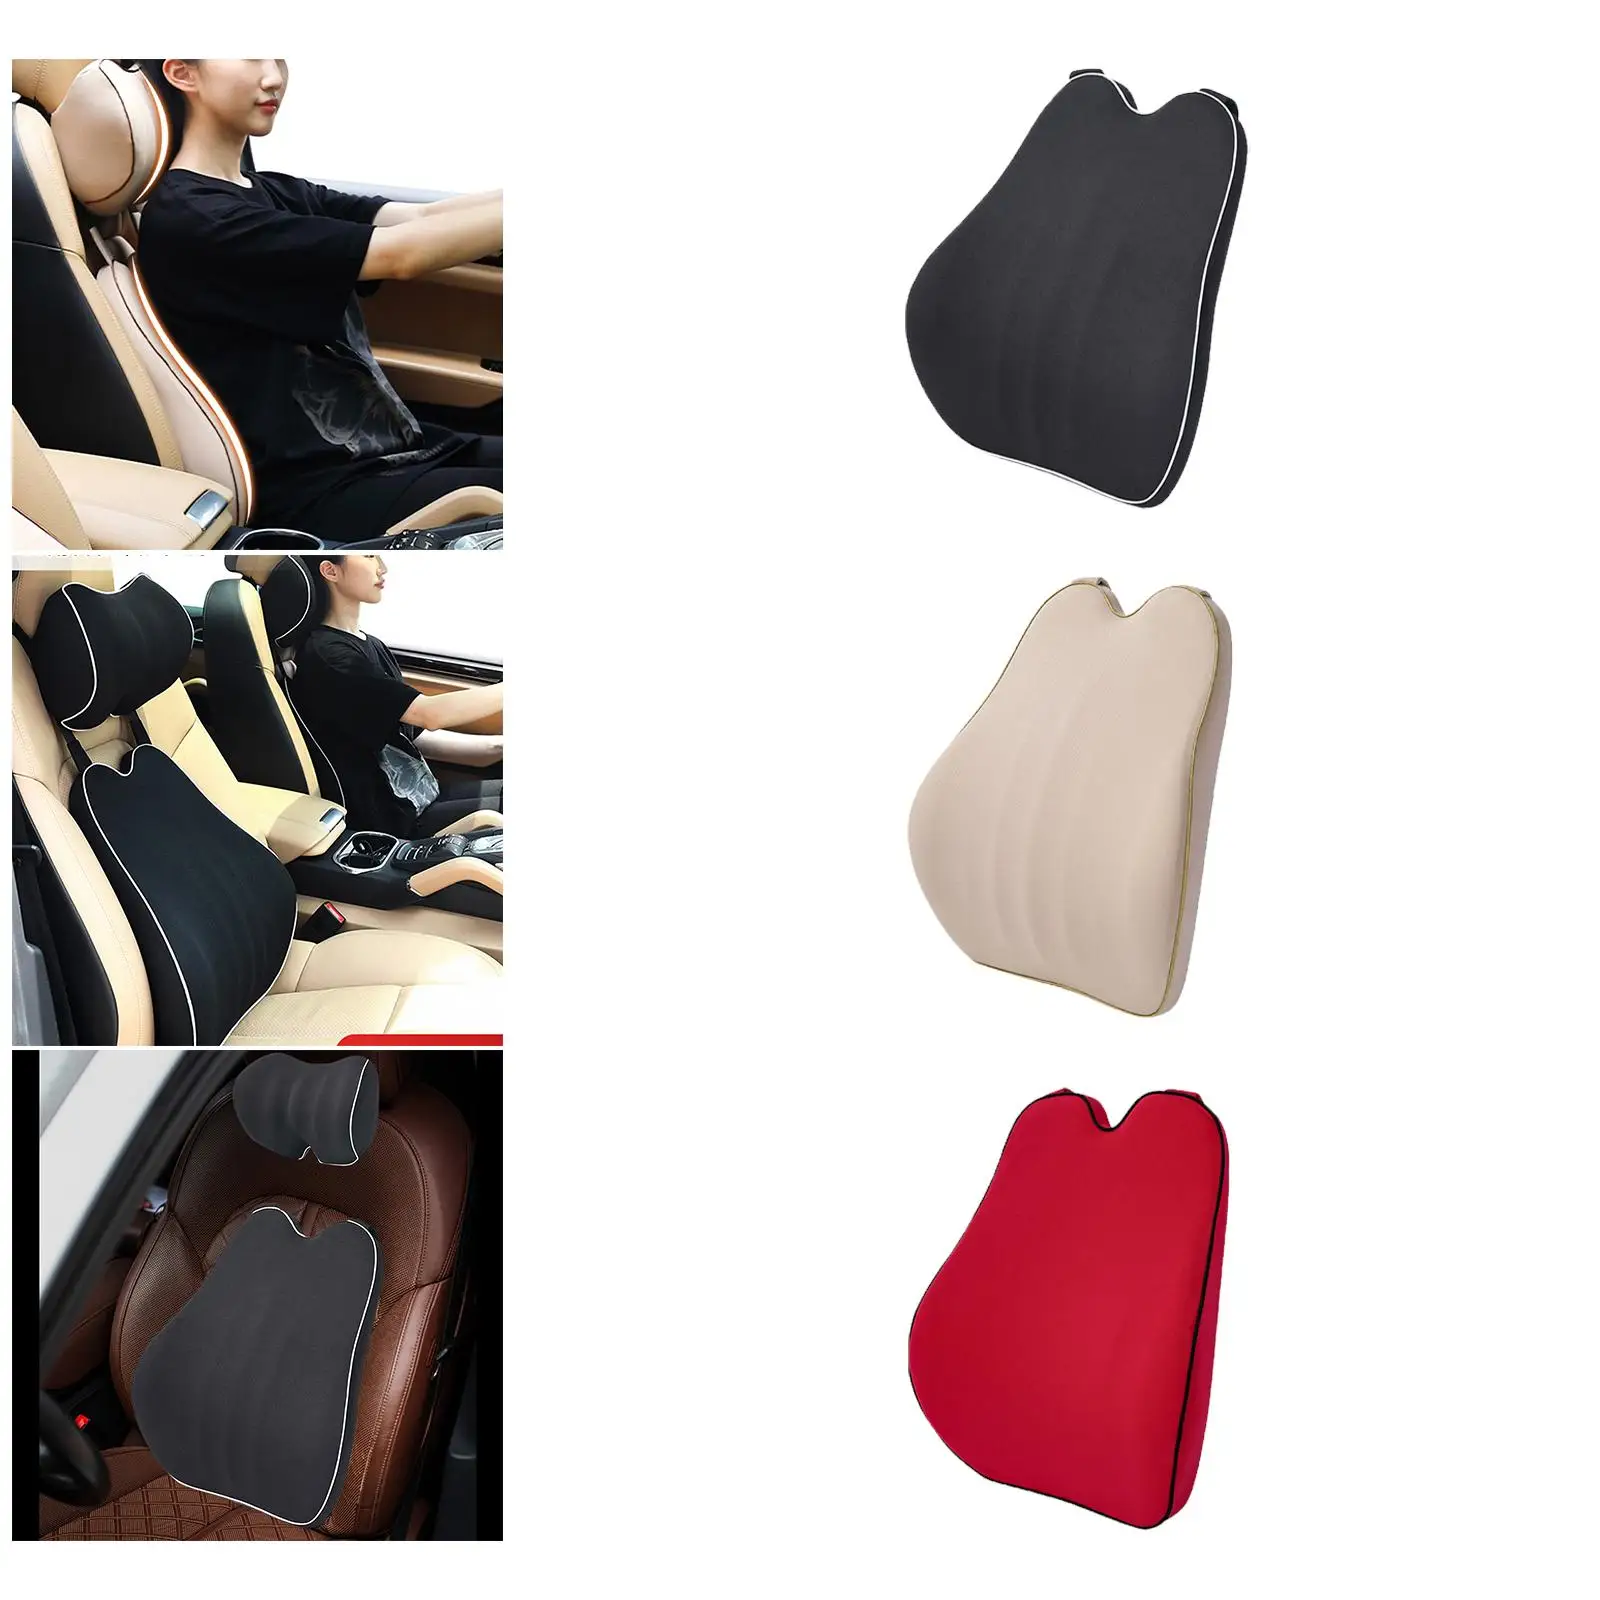 Lumbar Support Pillow with Adjustable Strap Car Lower Back Cushion for Car Seat Cars recliner Office Chair Driving